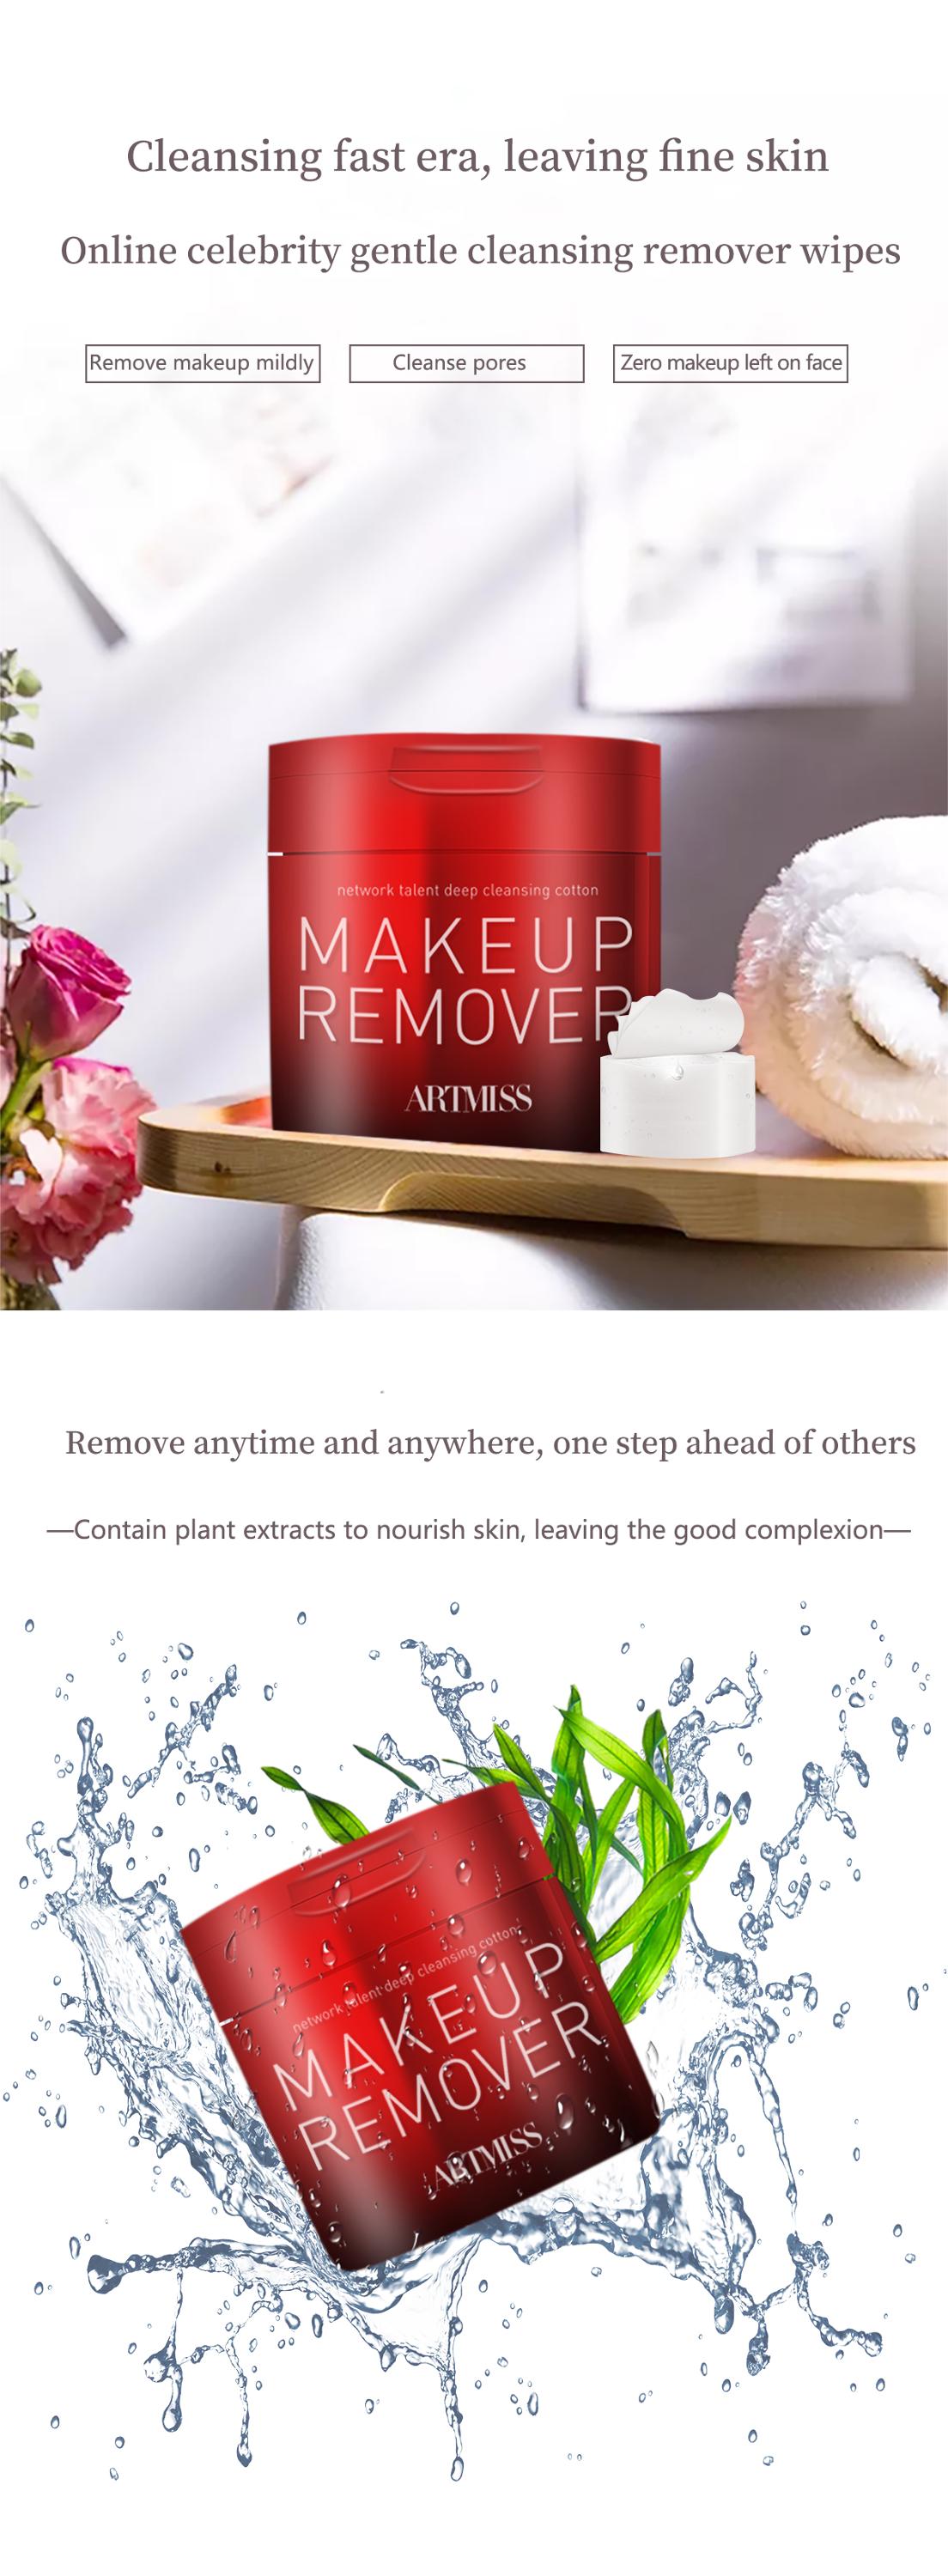 ARTMISS Cleansing Face Organic Cotton Makeup Remover Wipes